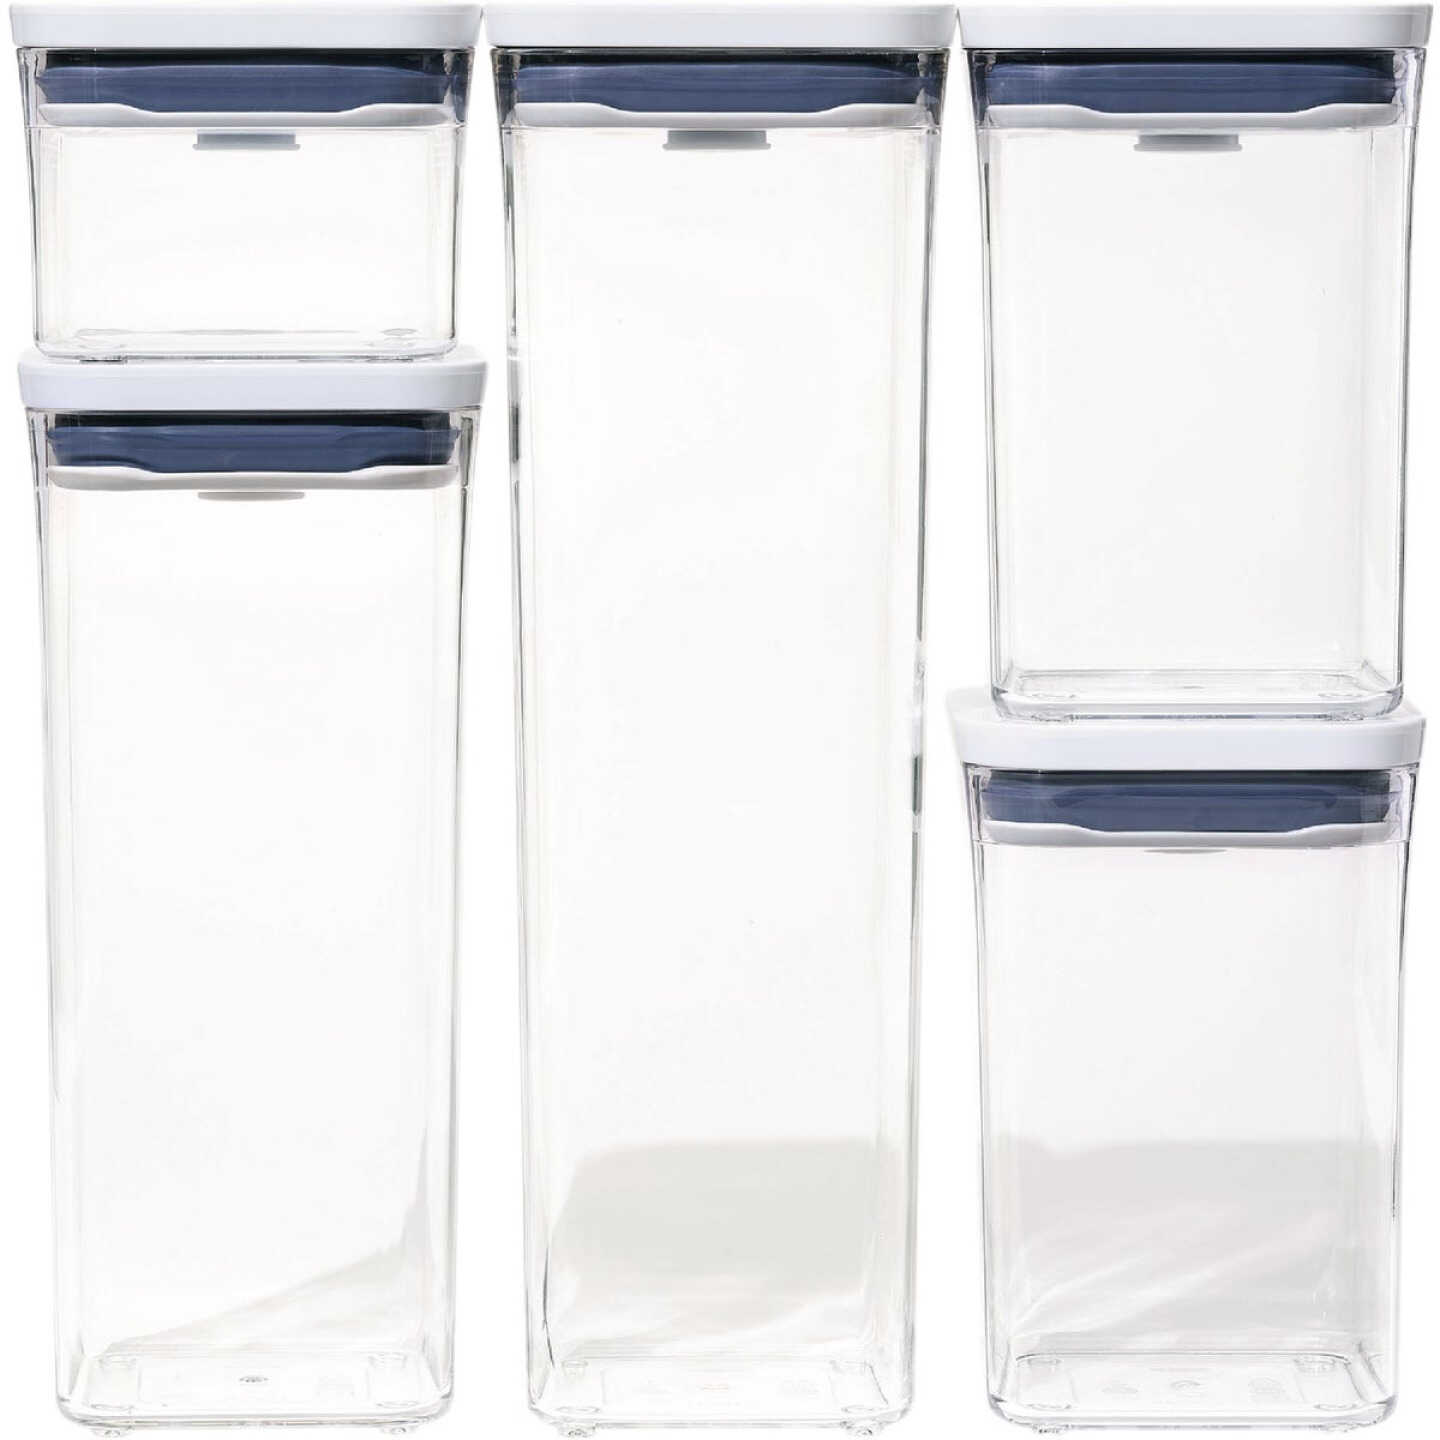 OXO Good Grips 5-Piece POP Container Set